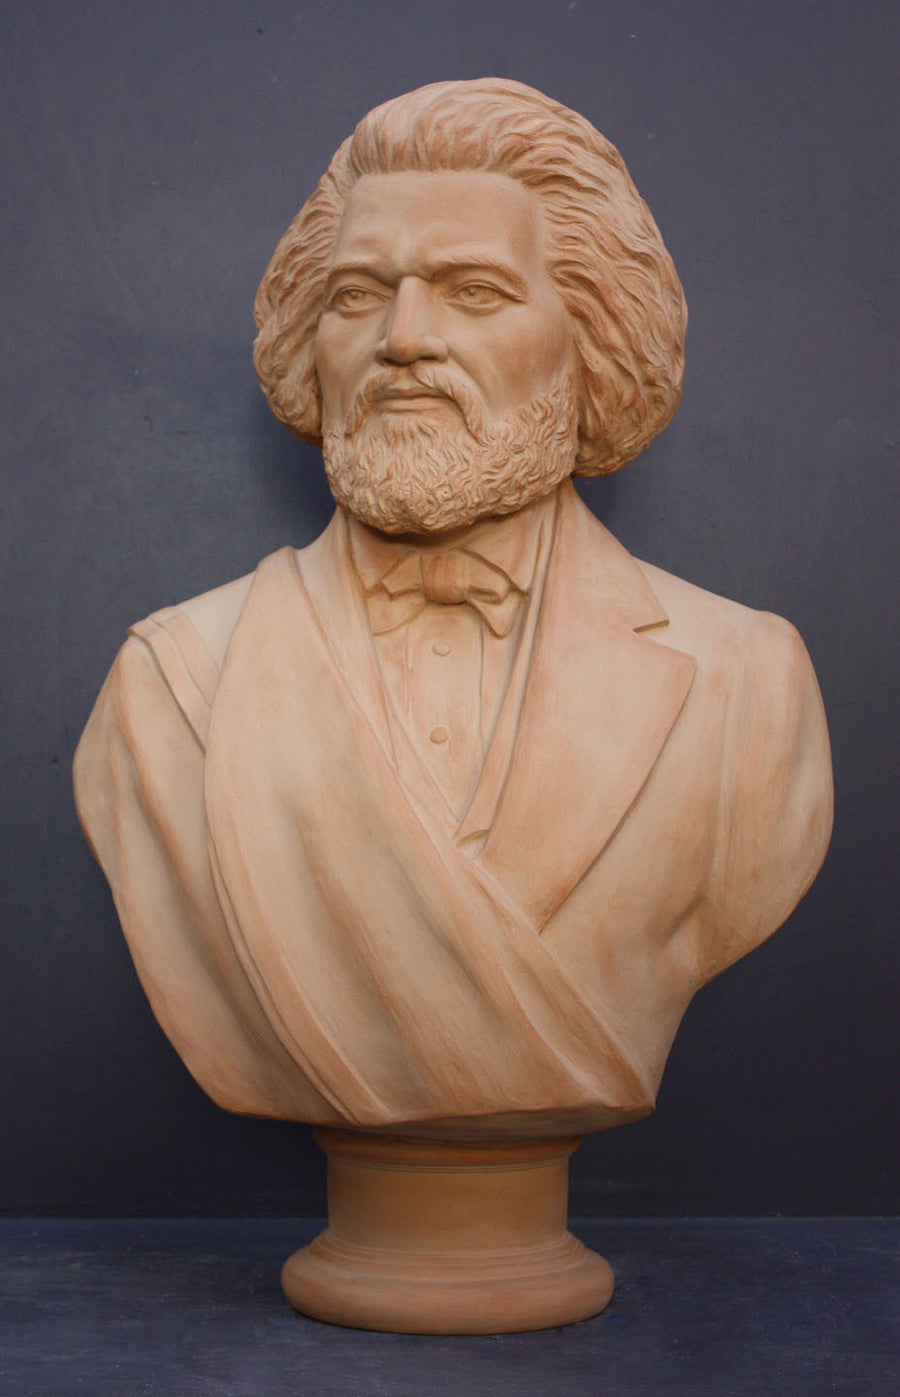 photo of terracotta-colored plaster cast sculpture of bust of Frederick Douglass with beard and in suit coat with toga over one shoulder on dark gray background